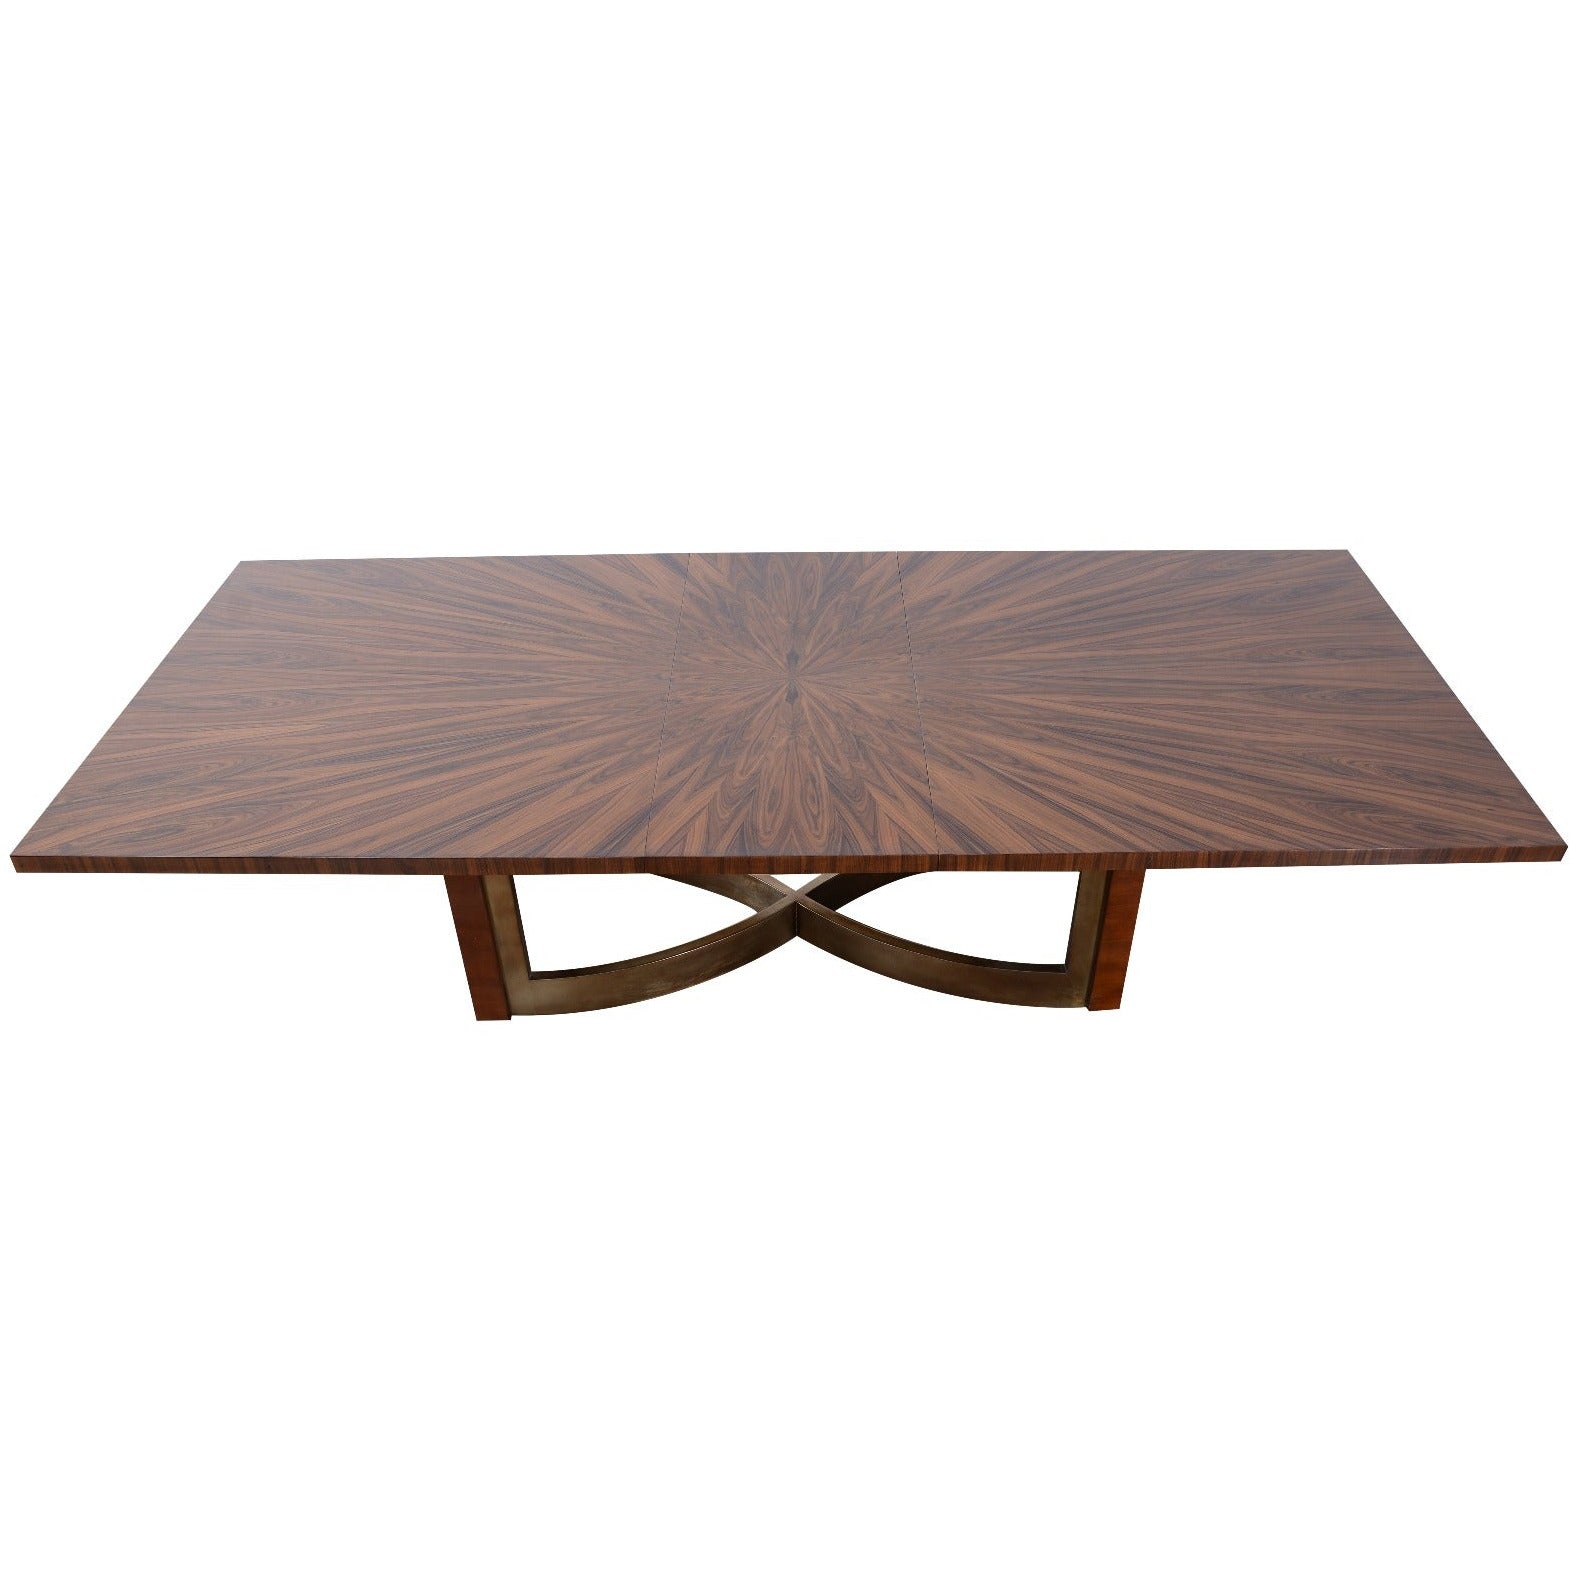 European Furniture - Glamour Dining Table in Brown - 56015-DT - New Star Living